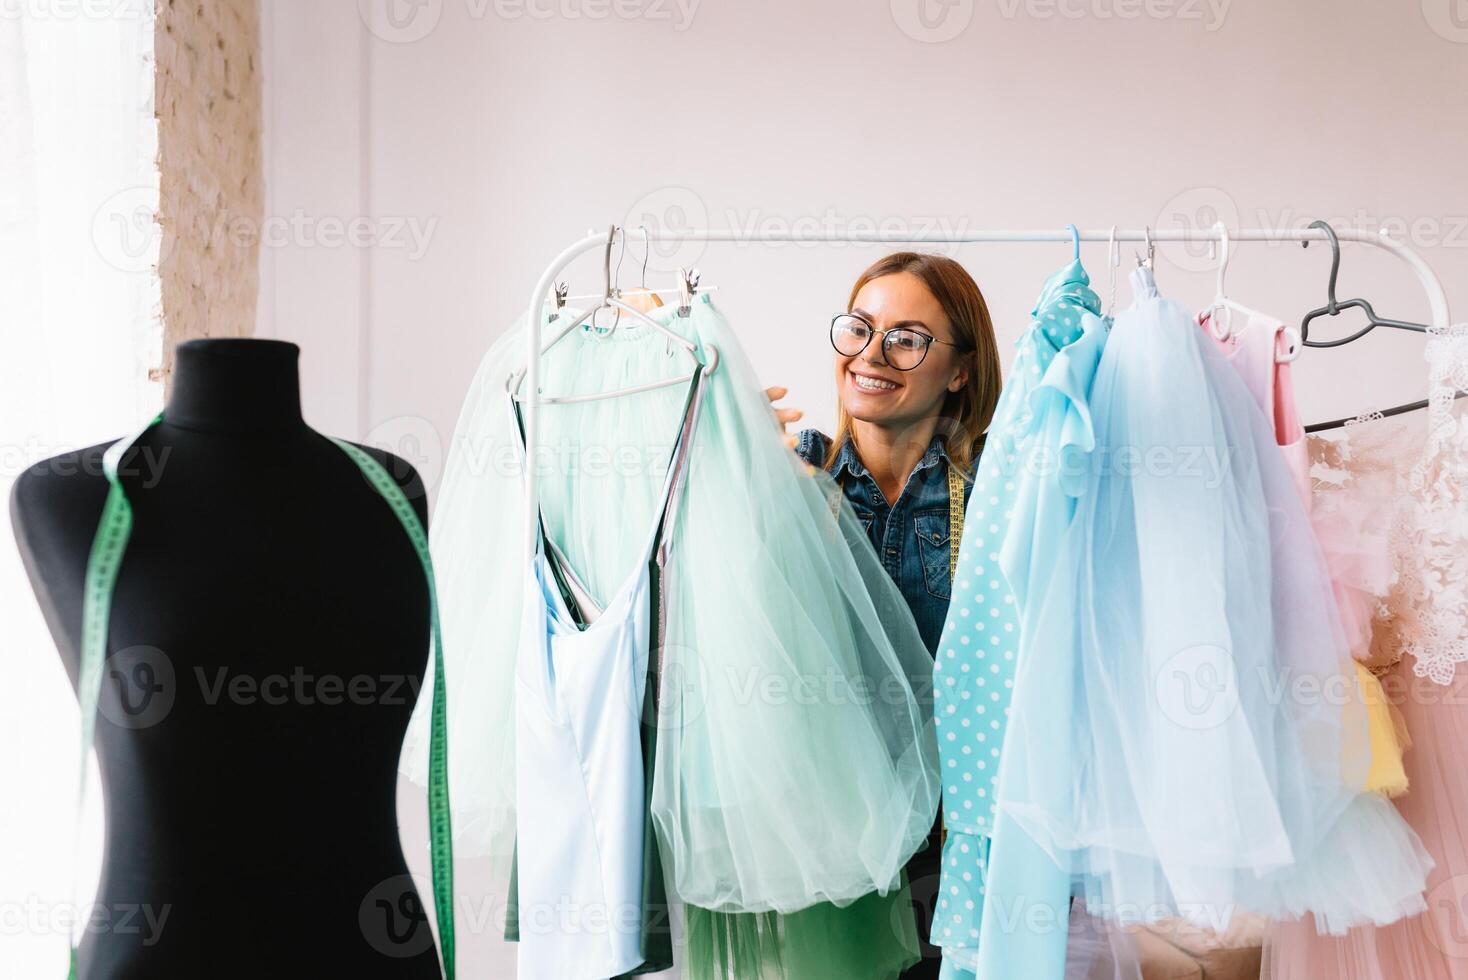 Happy entrepreneur fashion designer in textile business designing new retail clothing collection. Happy working woman seamstress , designer enjoy working on fabric sketches. entrepreneur concept photo